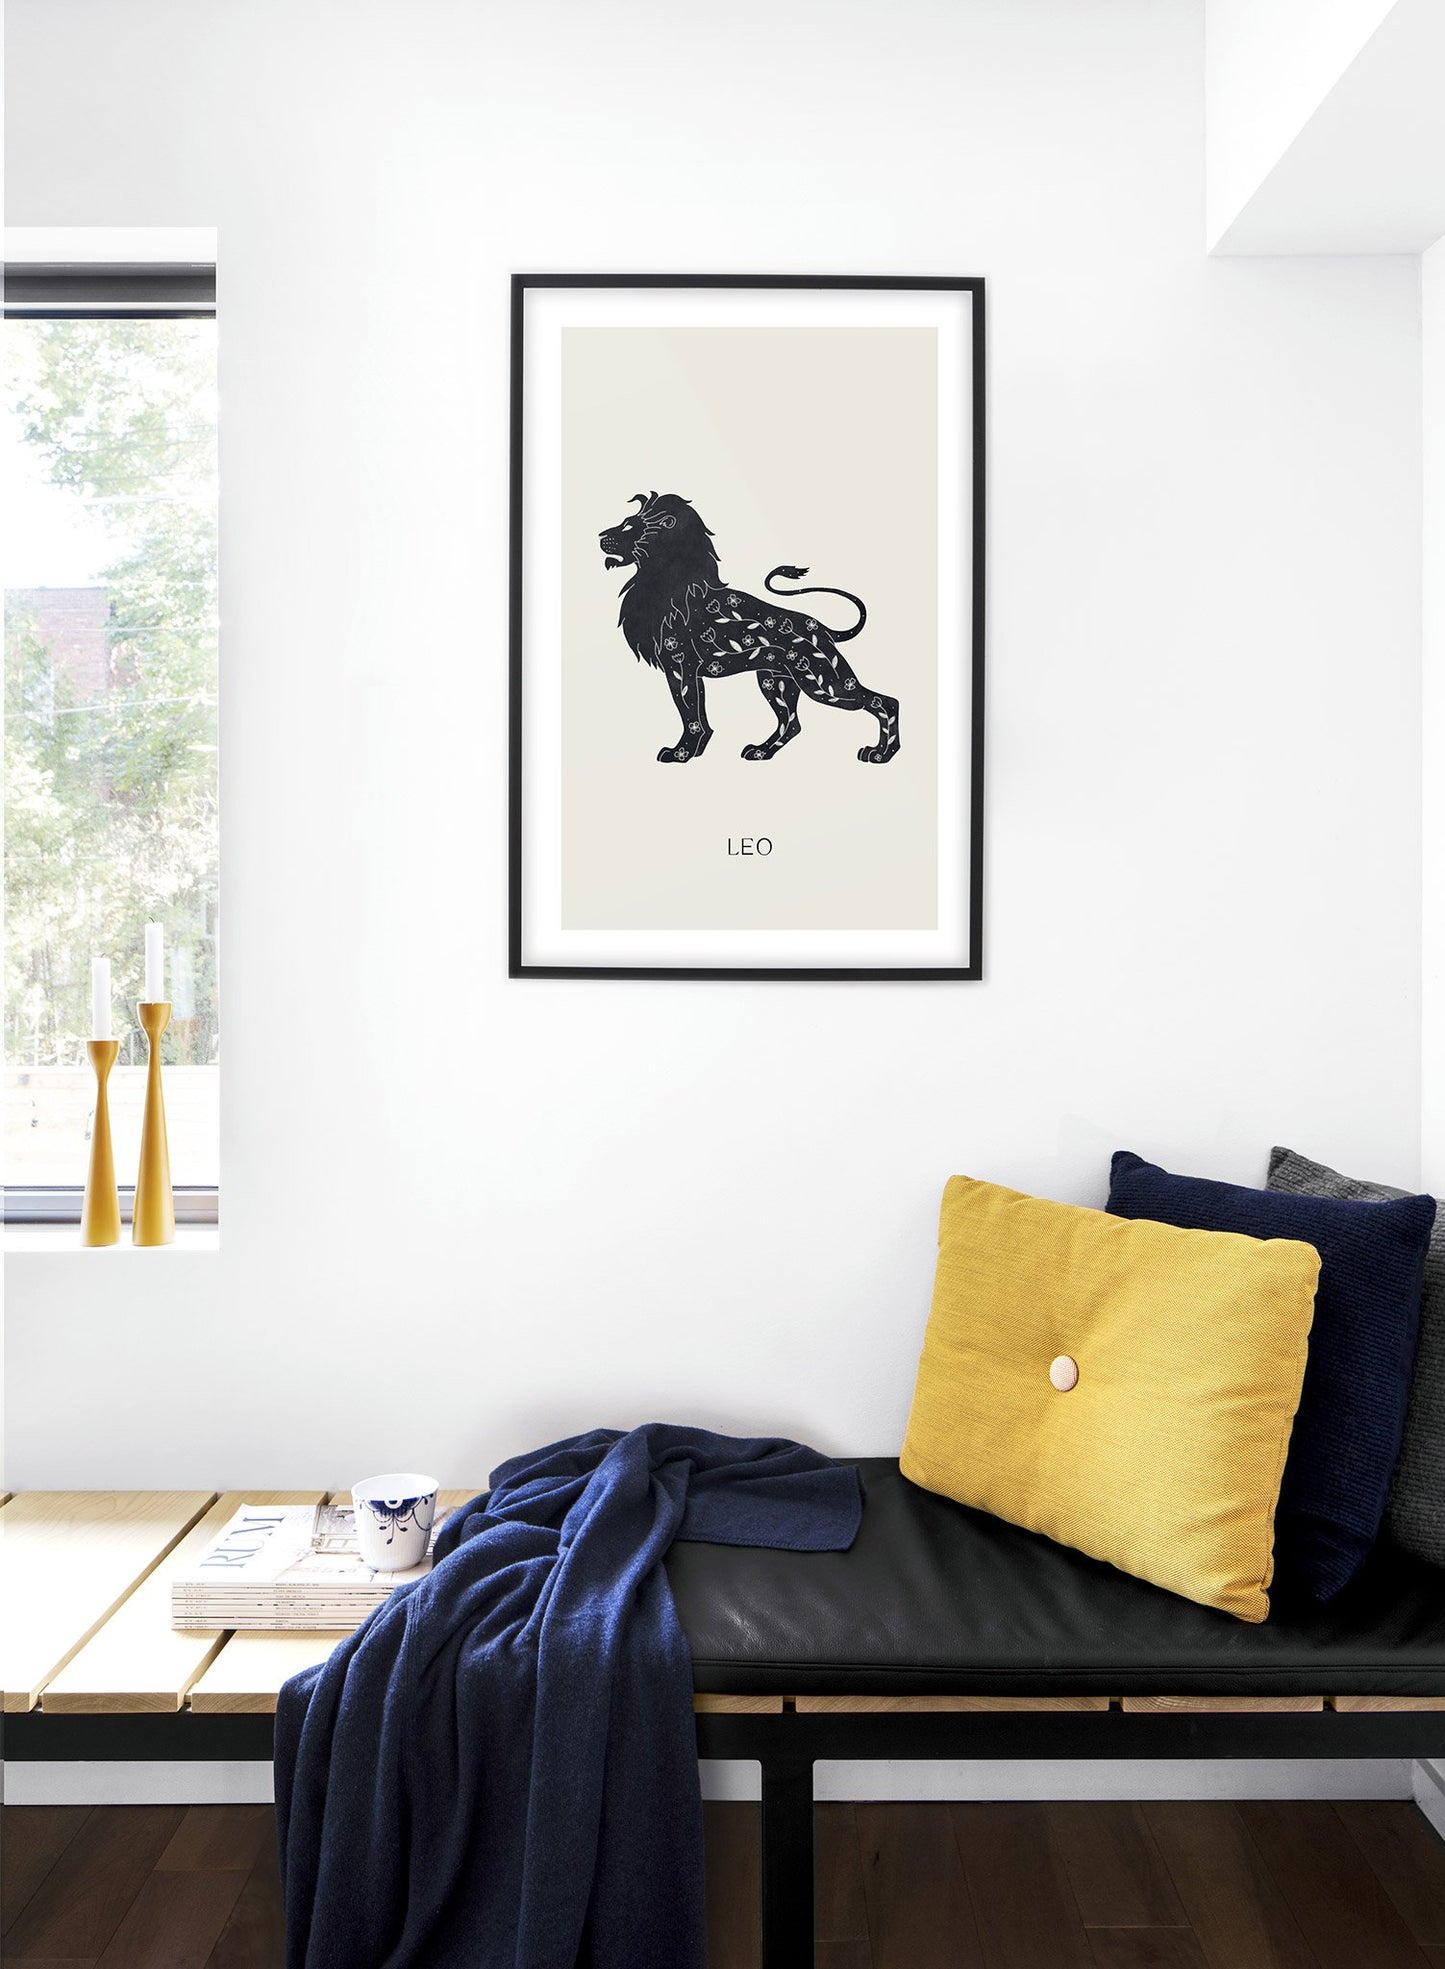 Celestial illustration poster by Opposite Wall with horoscope zodiac of Leo - Lifestyle - Bedroom